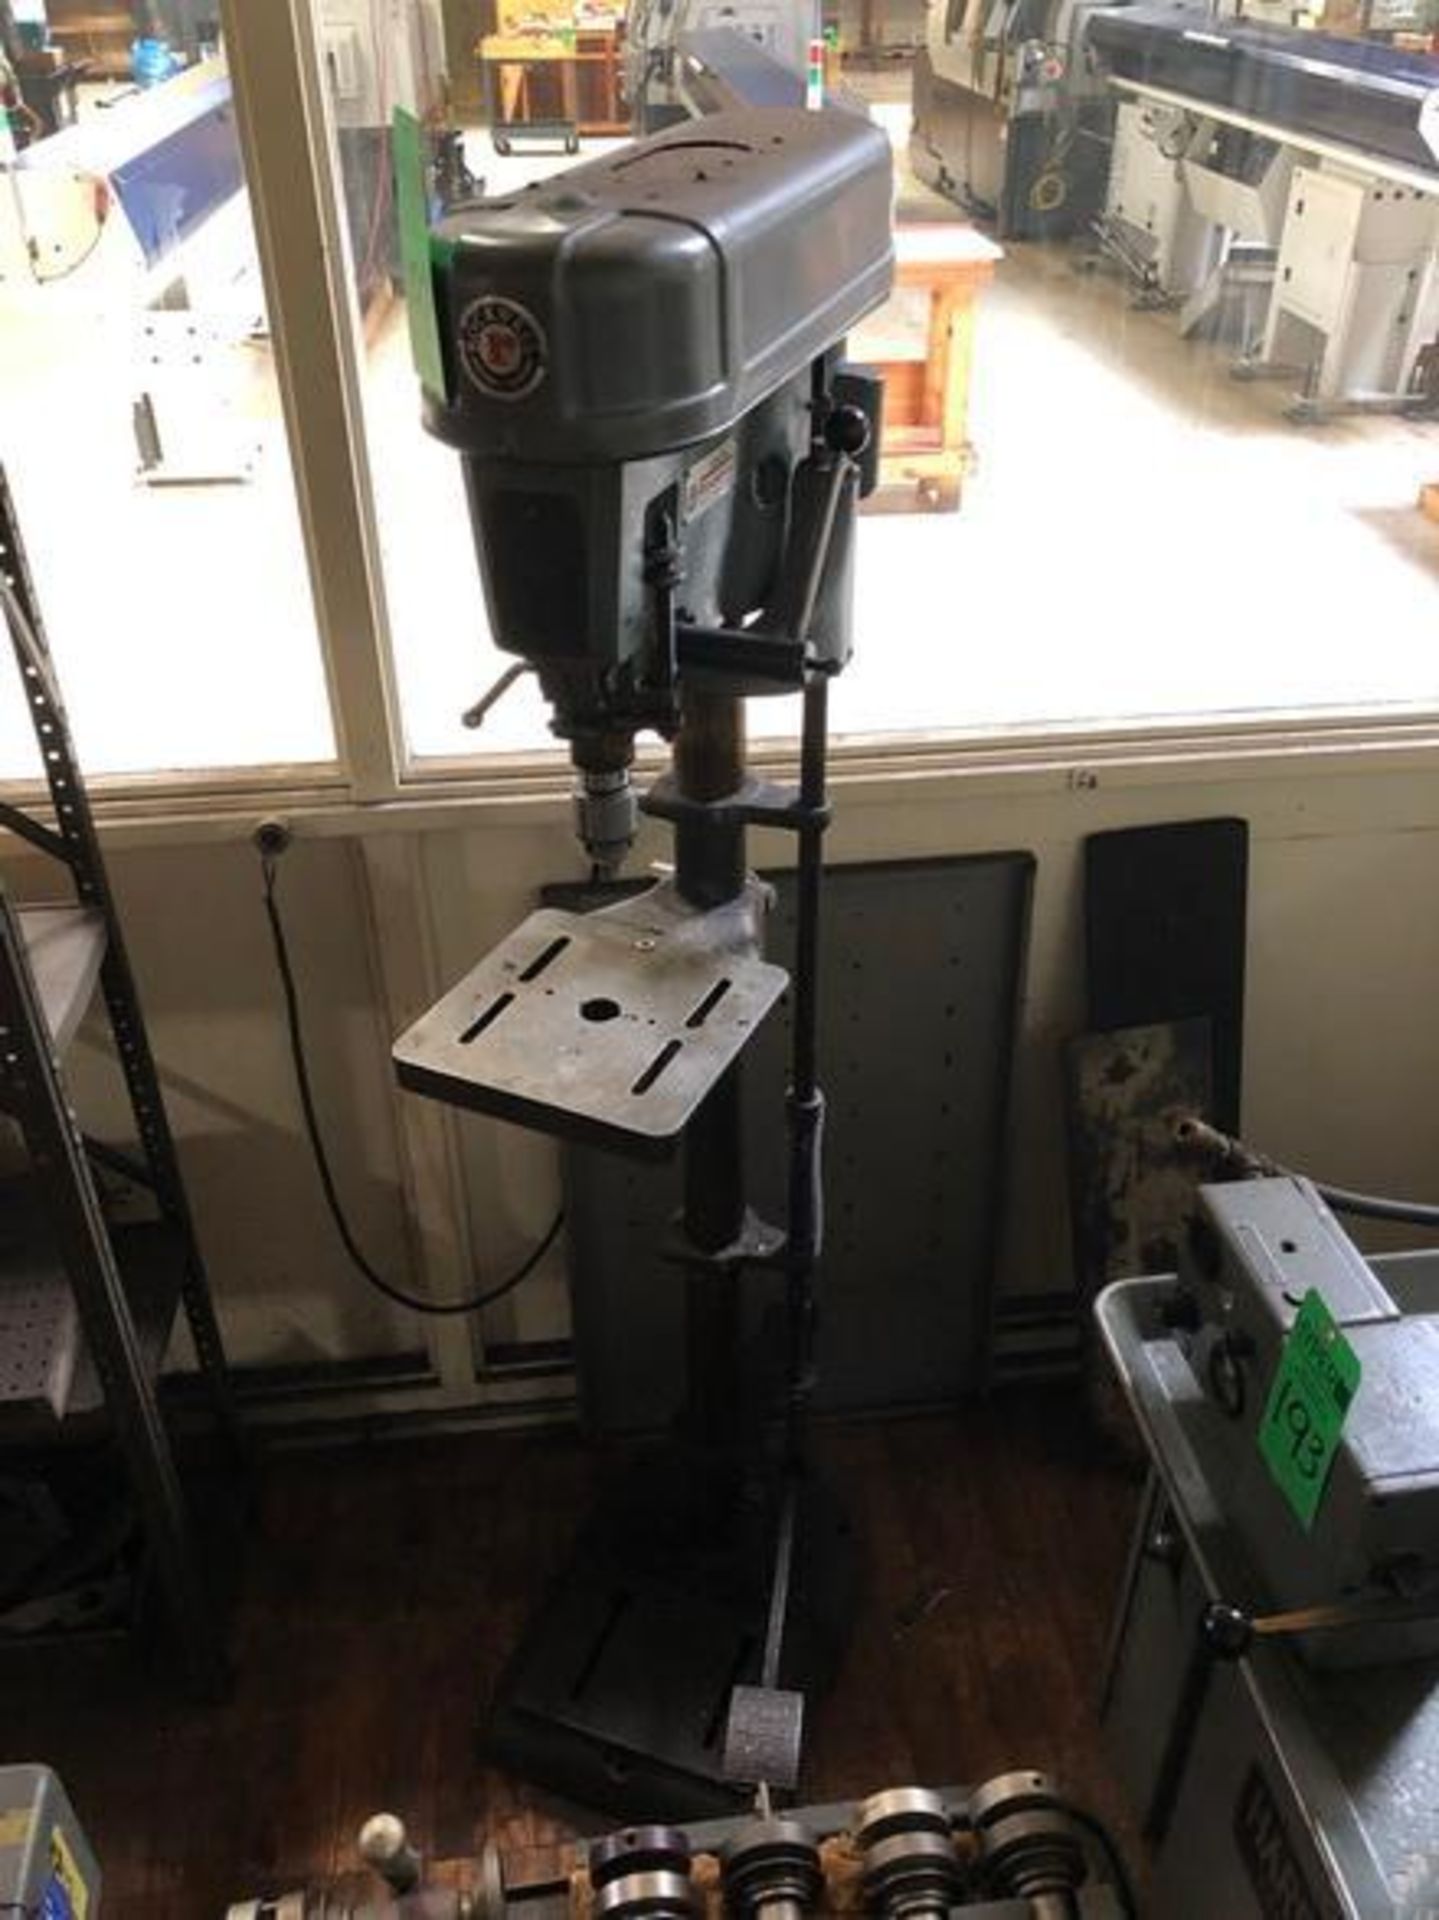 Delta Rockwell Model: 15-017 Drill Press Adjustable table size 10" 1/2 x 10" , Motor model: 62-610 p - Image 2 of 5